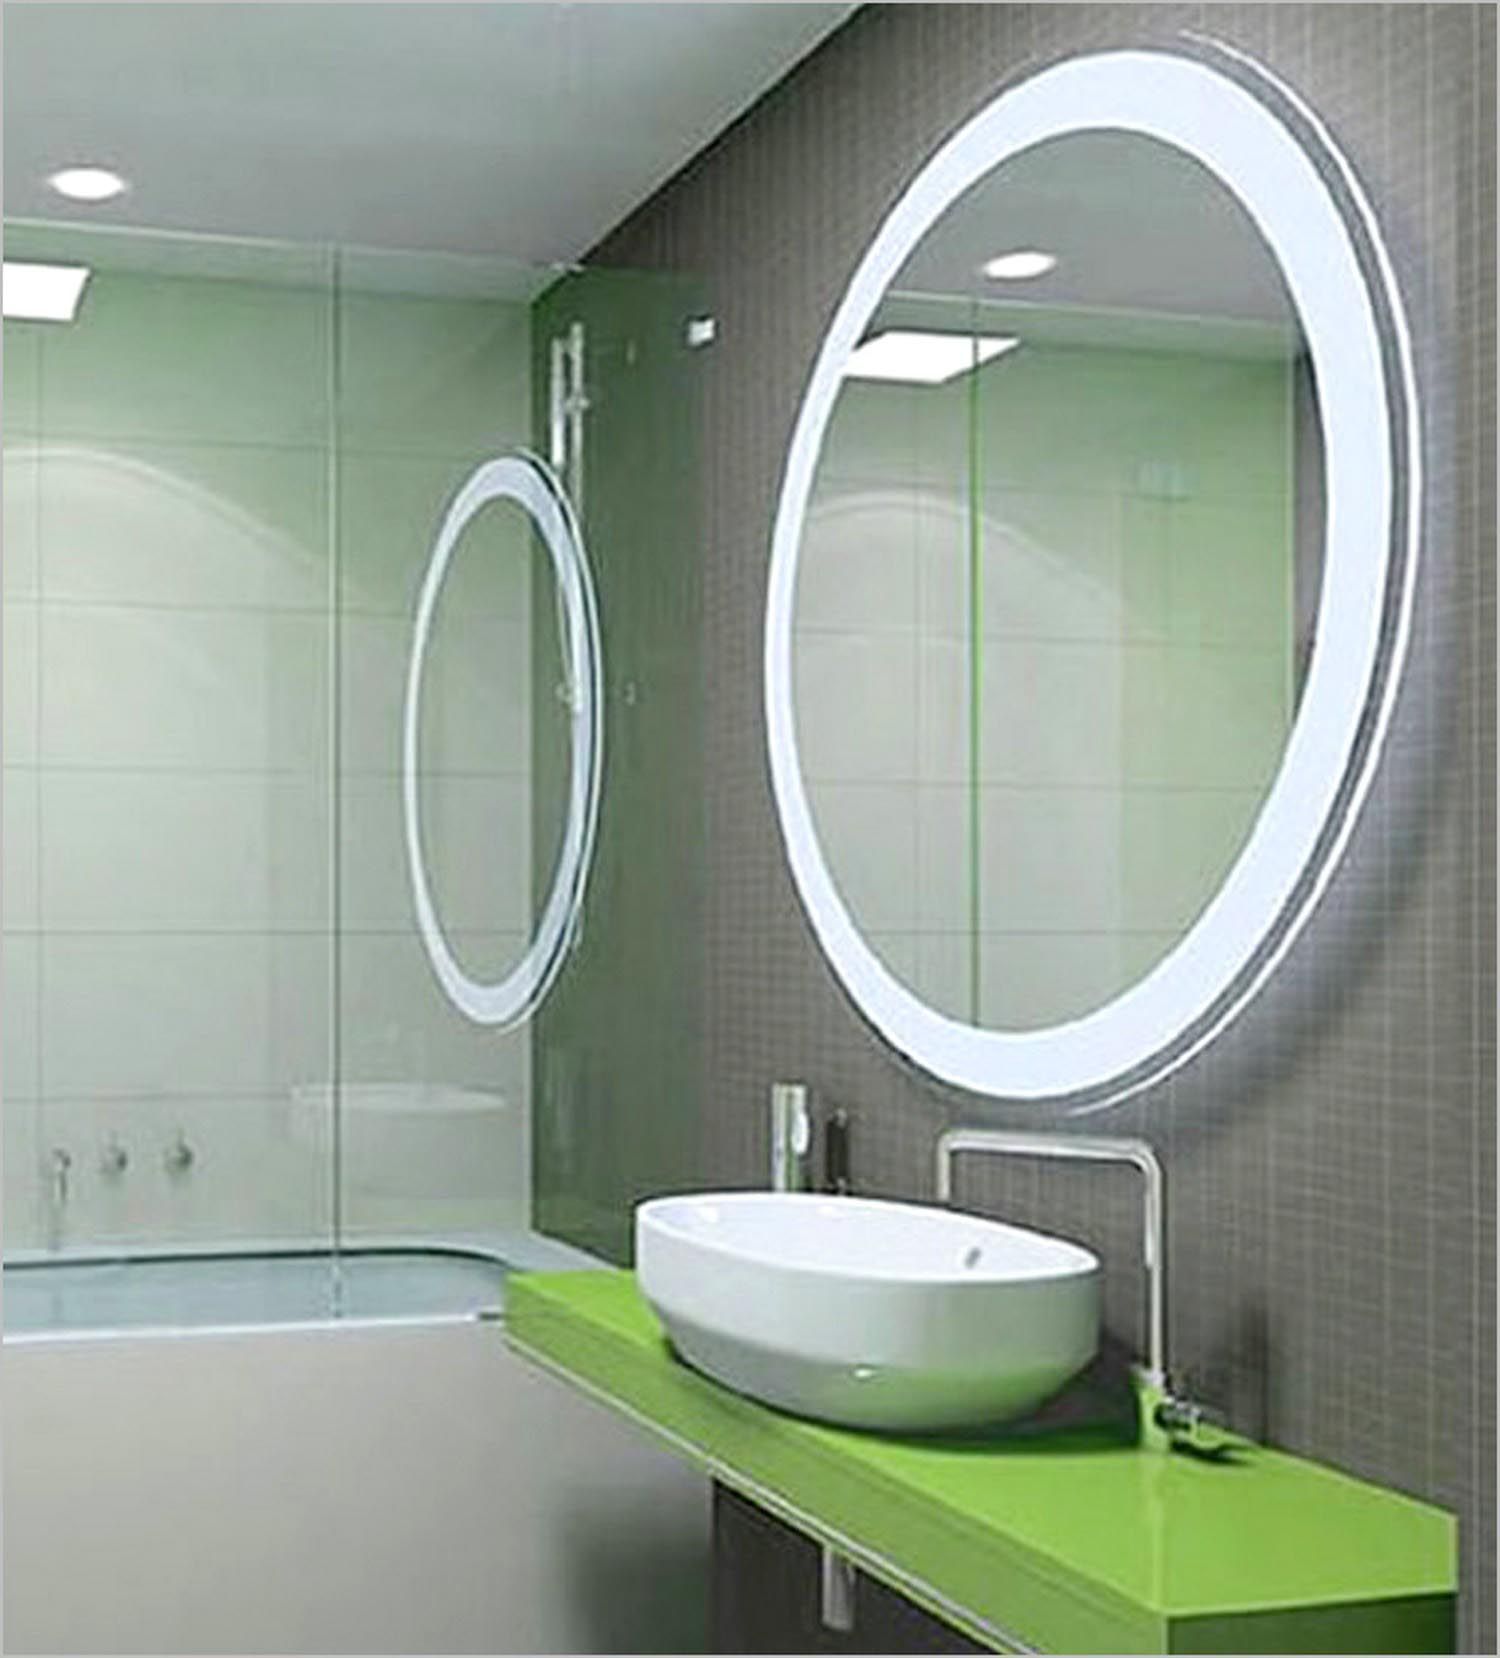 Do It Yourself: Unique Bathroom Mirrors | Best Decor Things Regarding Vanity Mirrors (View 2 of 15)